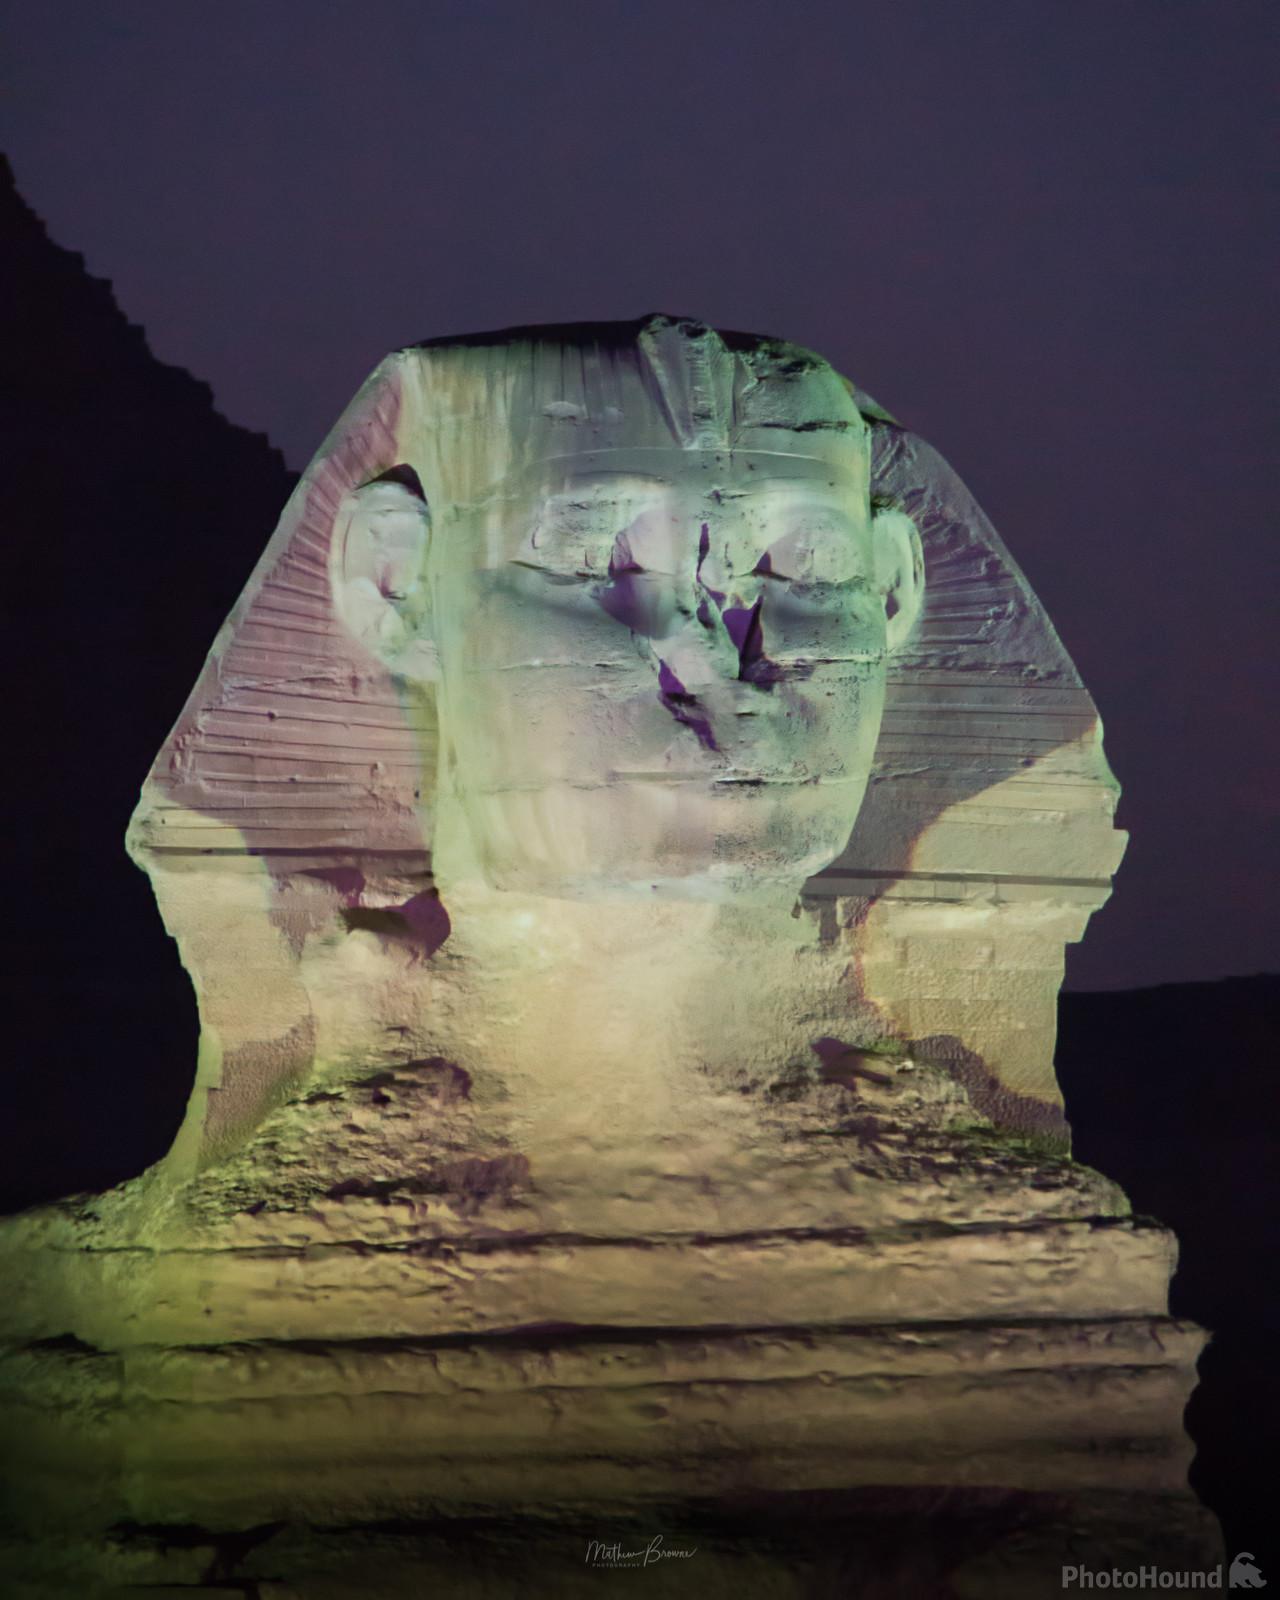 Image of Pyramids Sound And Light Show by Mathew Browne